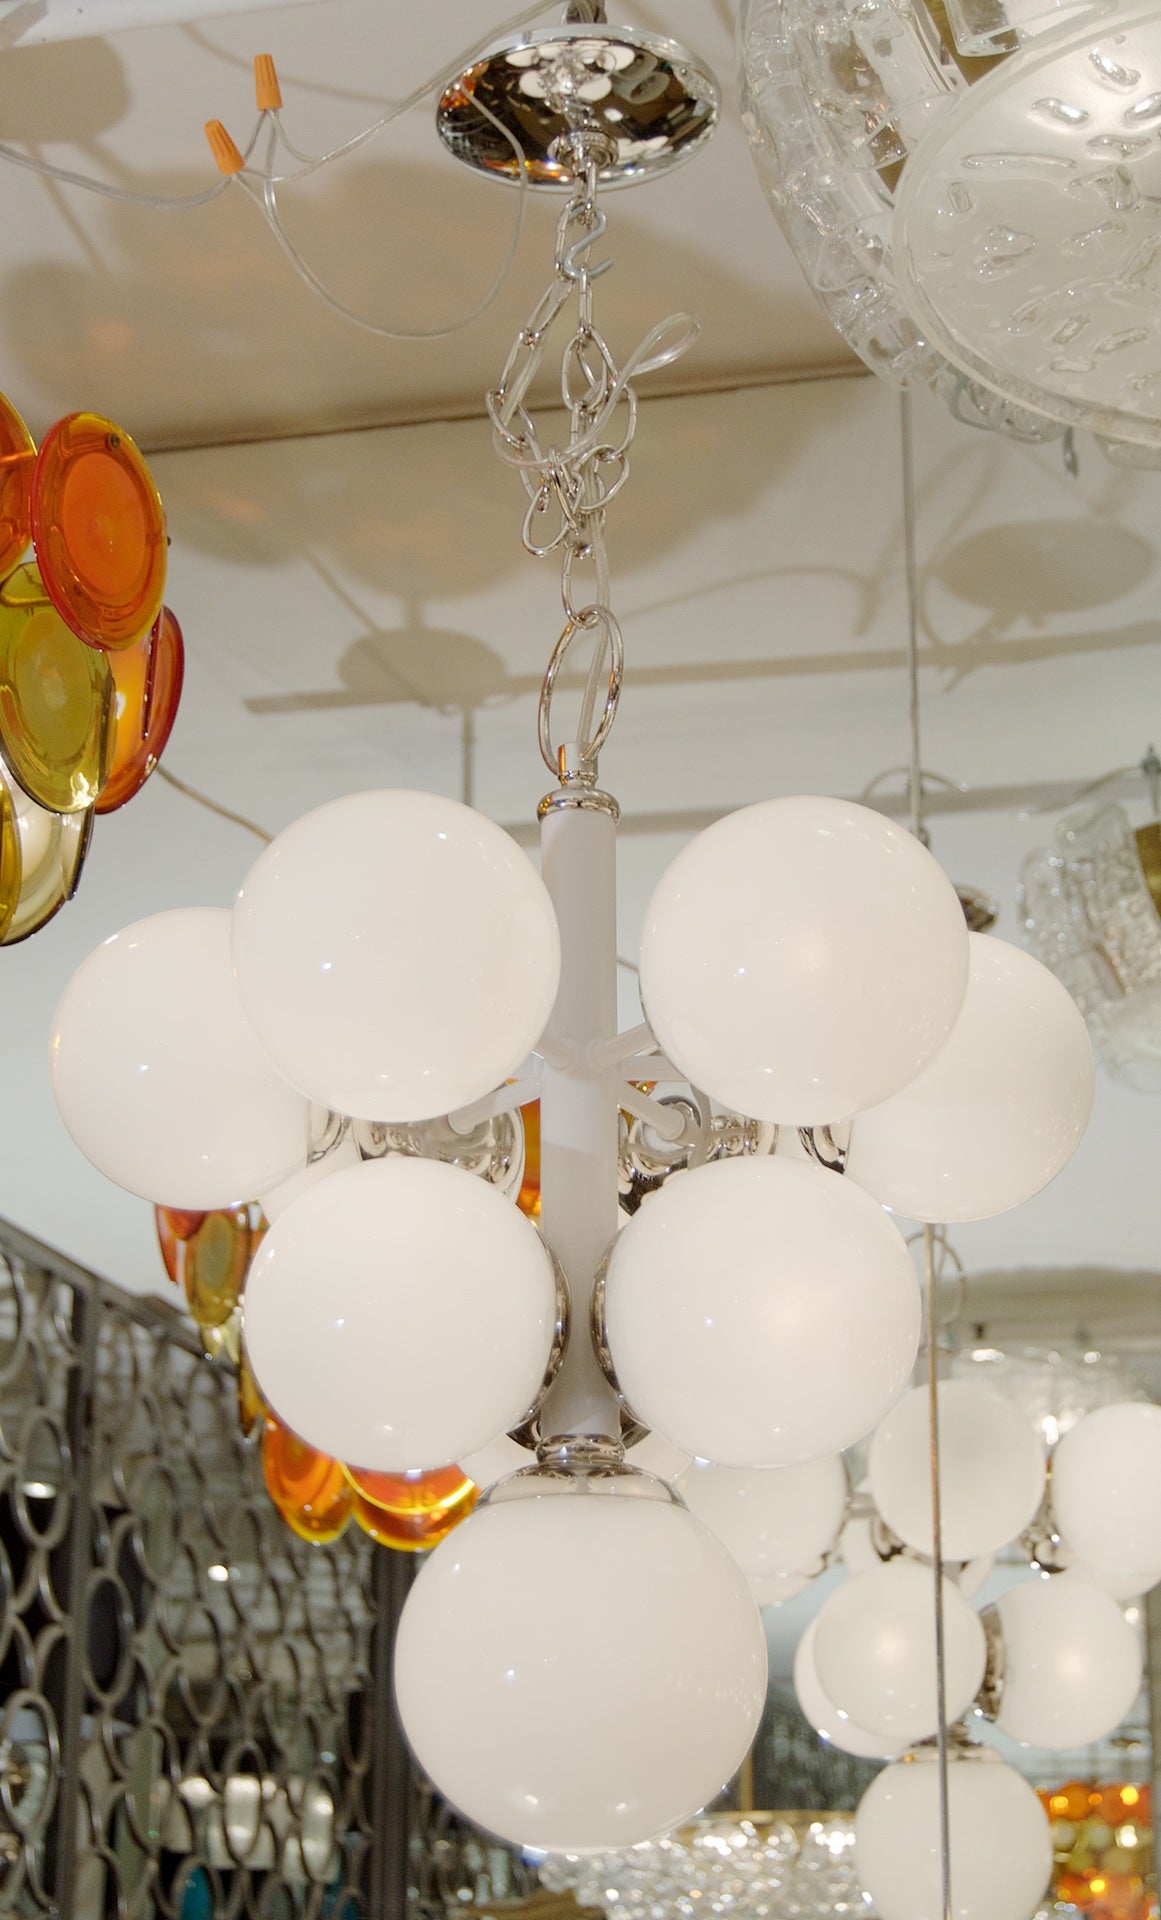 White Enameled Pyramid Chandelier with Gloss Opal Globes